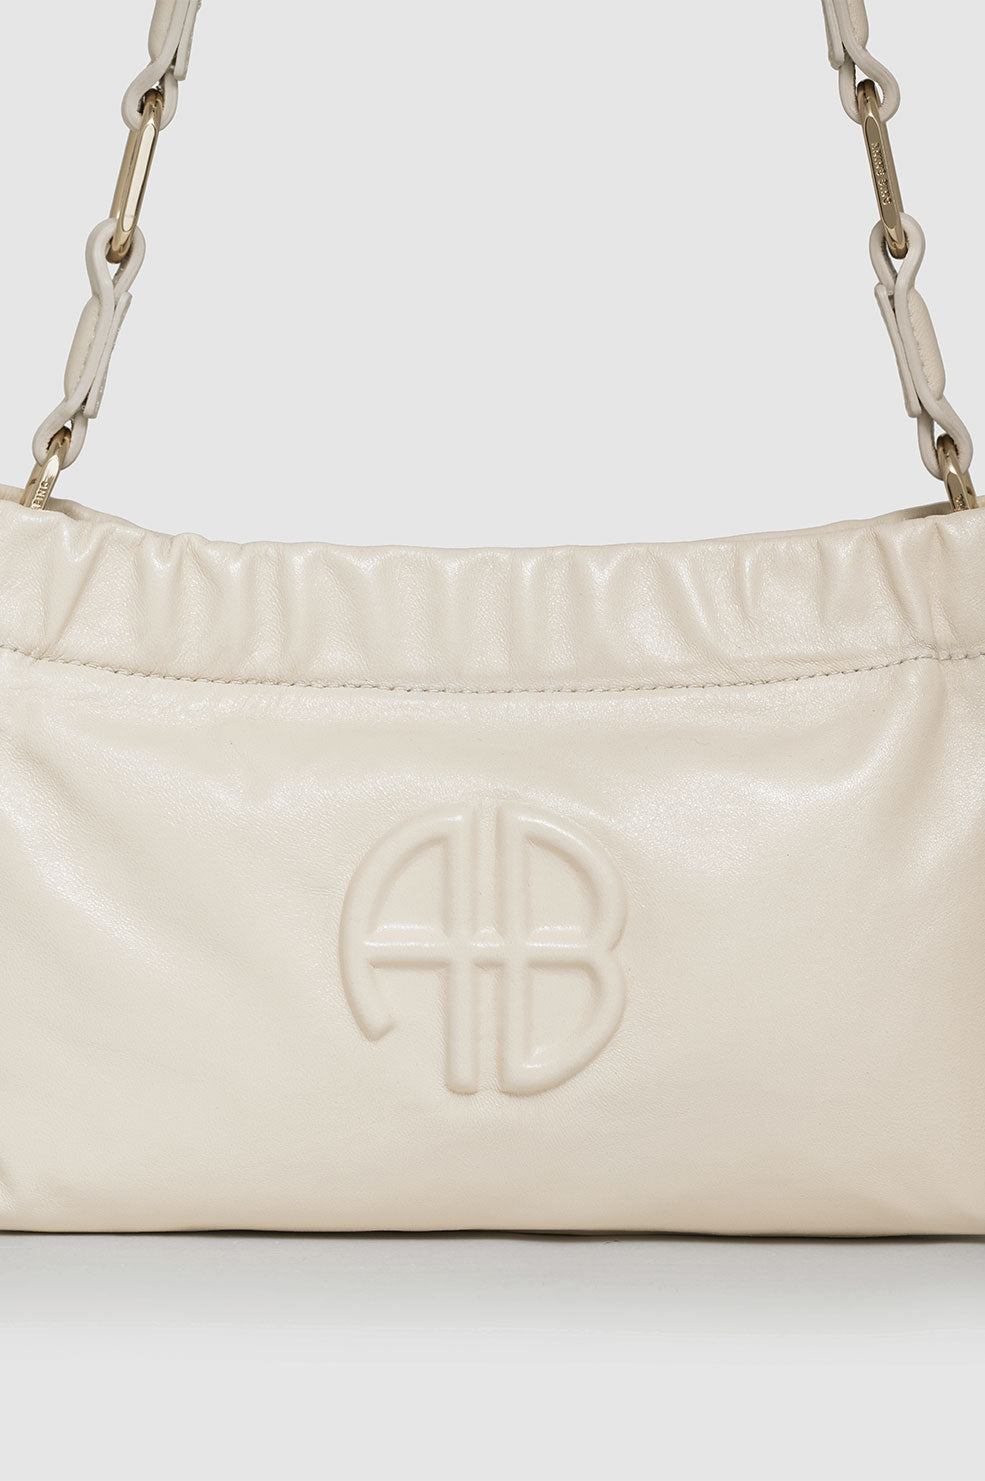 ANINE BING Small Kate Shoulder Bag - Ivory - Detail View